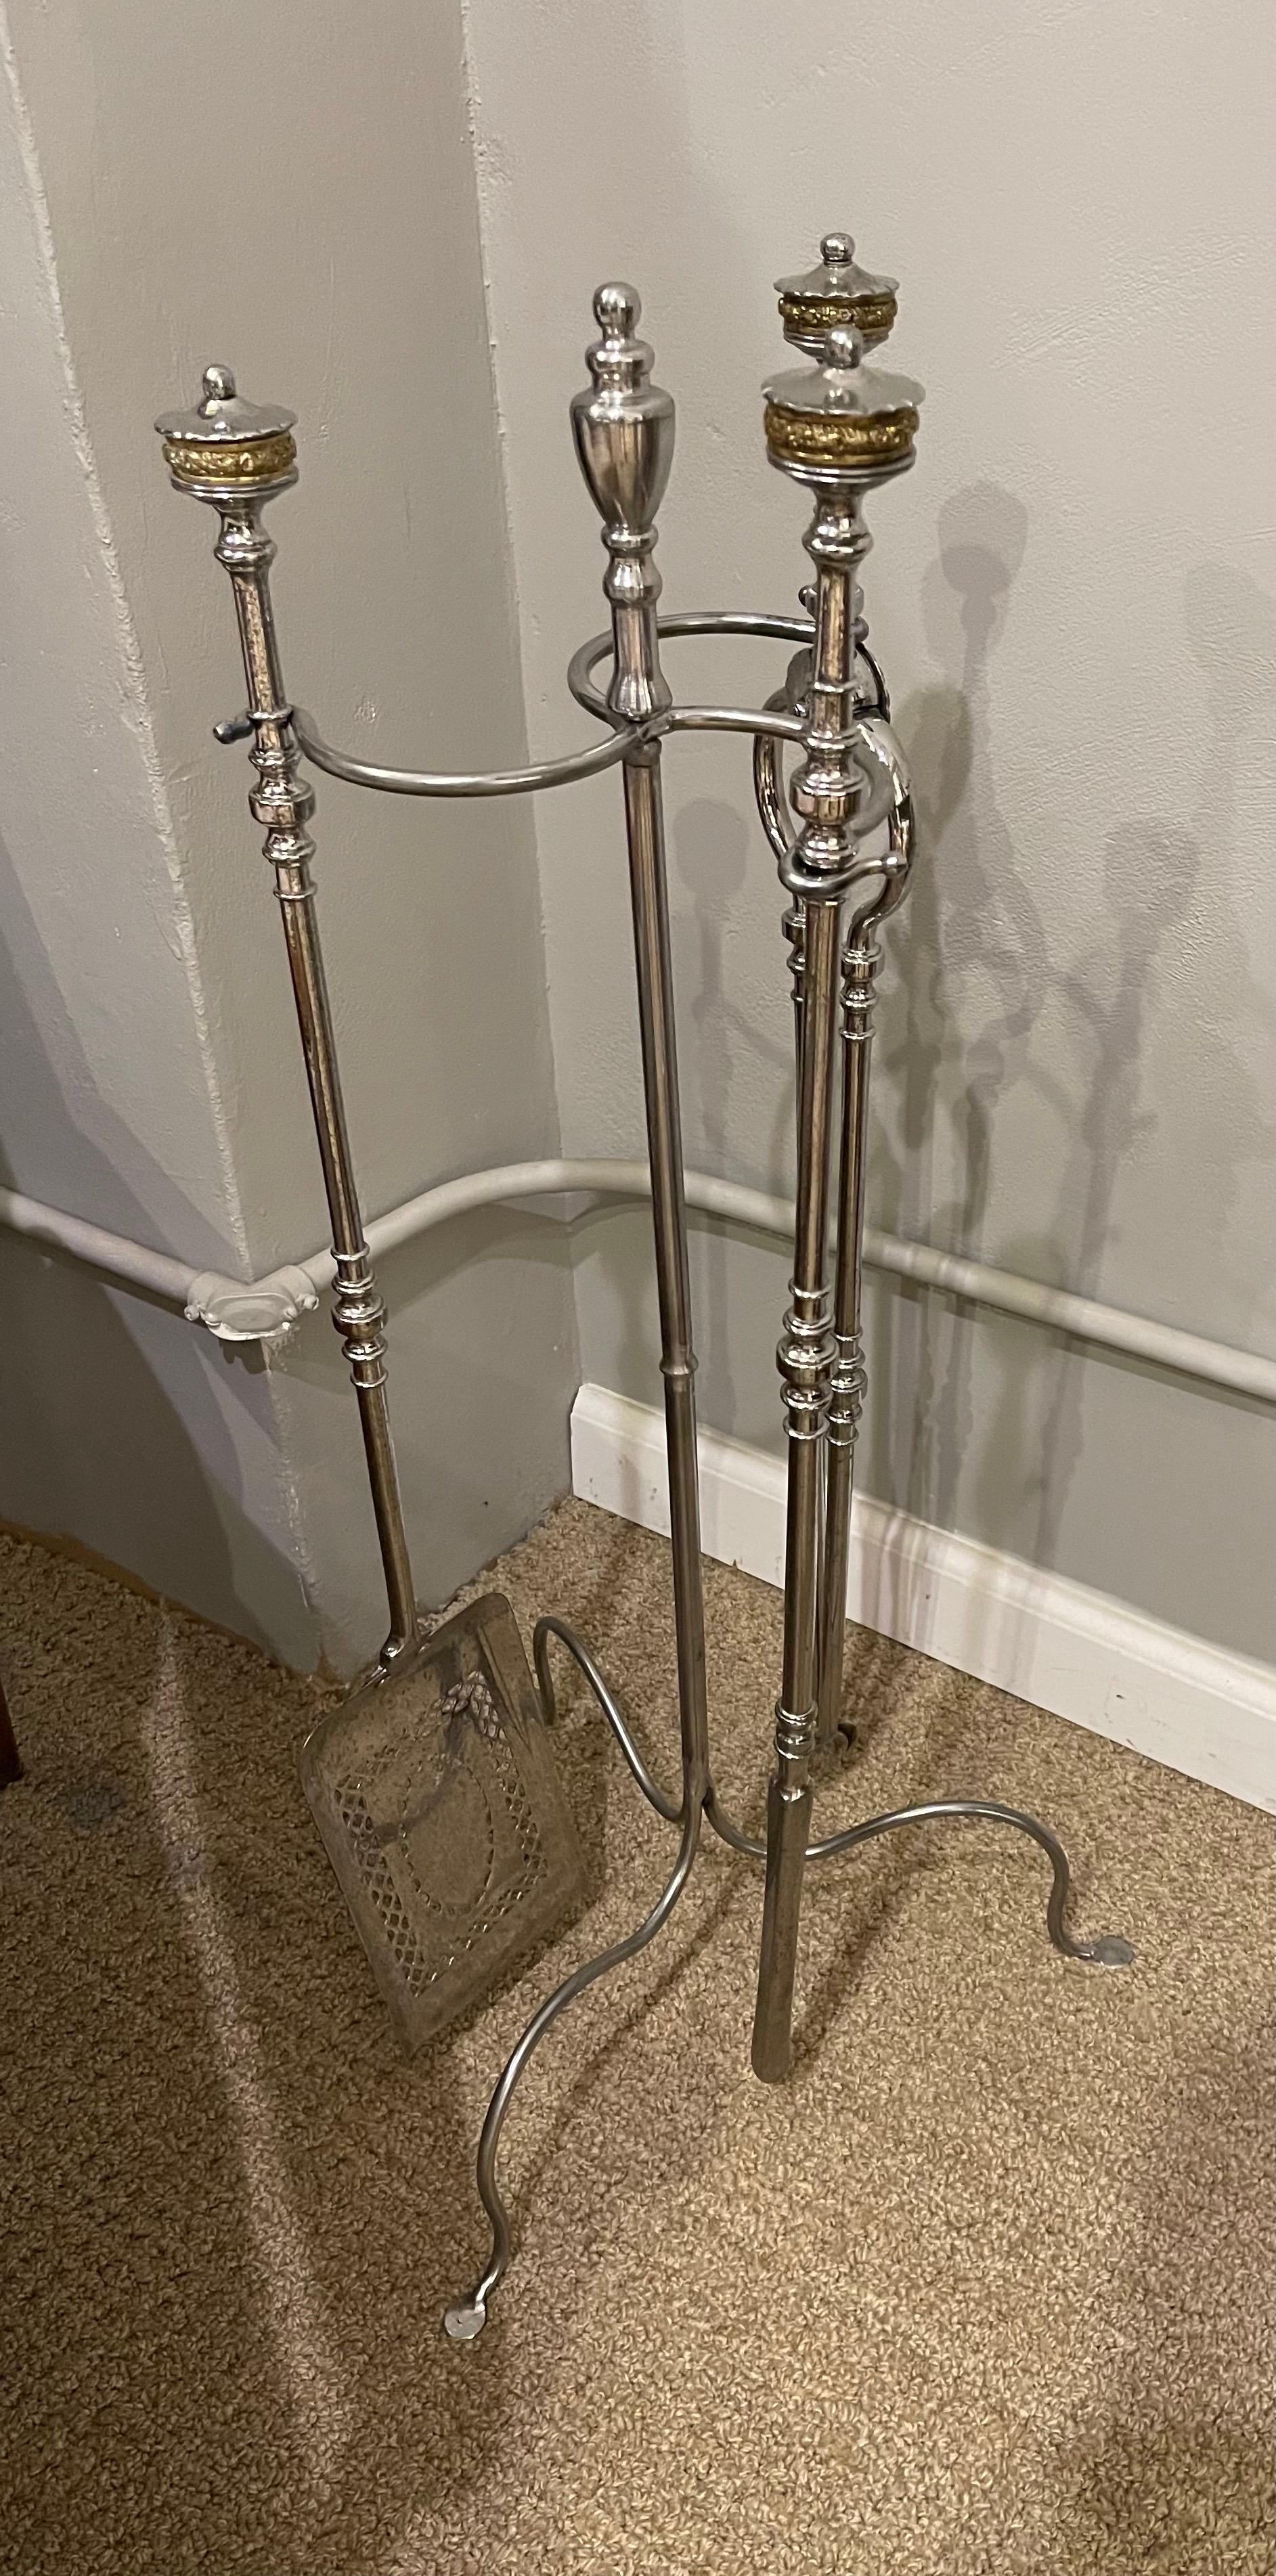 Exceptional set of Polished Steel & Gilt-Metal fire tools on stand. Tongs , shovel & poker
( Stand or a Later date )
Measures: Height: 32 in. (81.28 cm)
Width: 6 in. (15.24 cm)
Depth: 1 in. (2.54 cm).
 